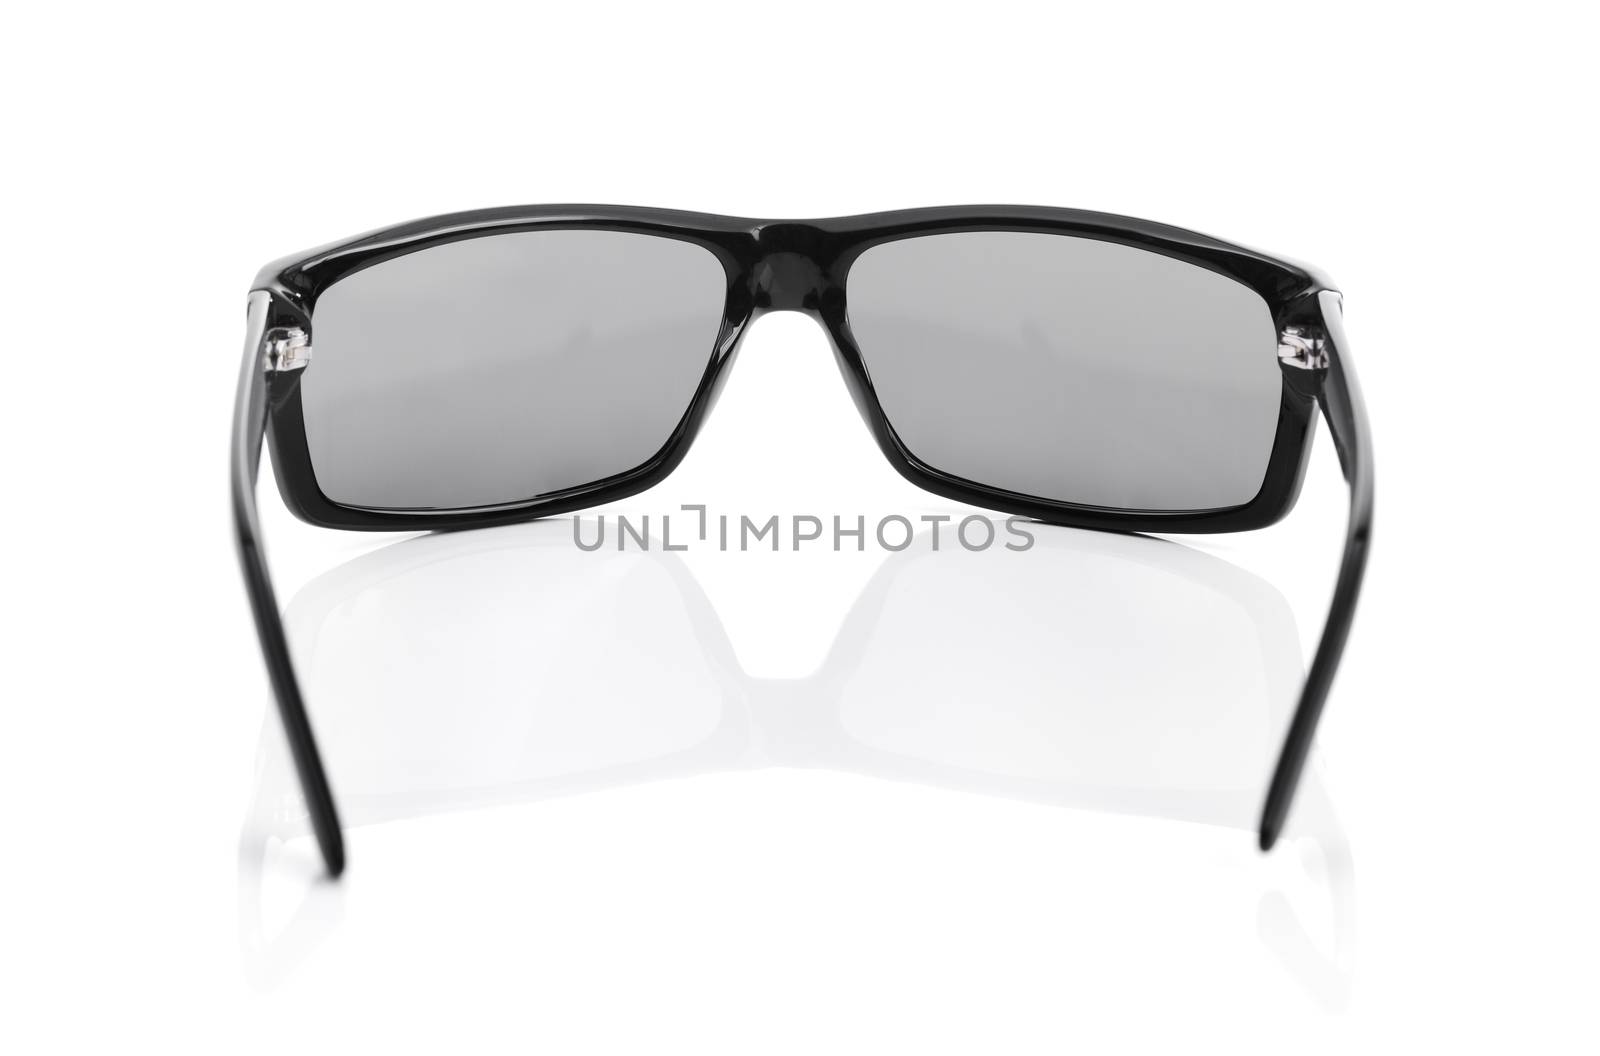 A Pair of quality Sunglasses on white with natural reflection. Short depth-of-field.